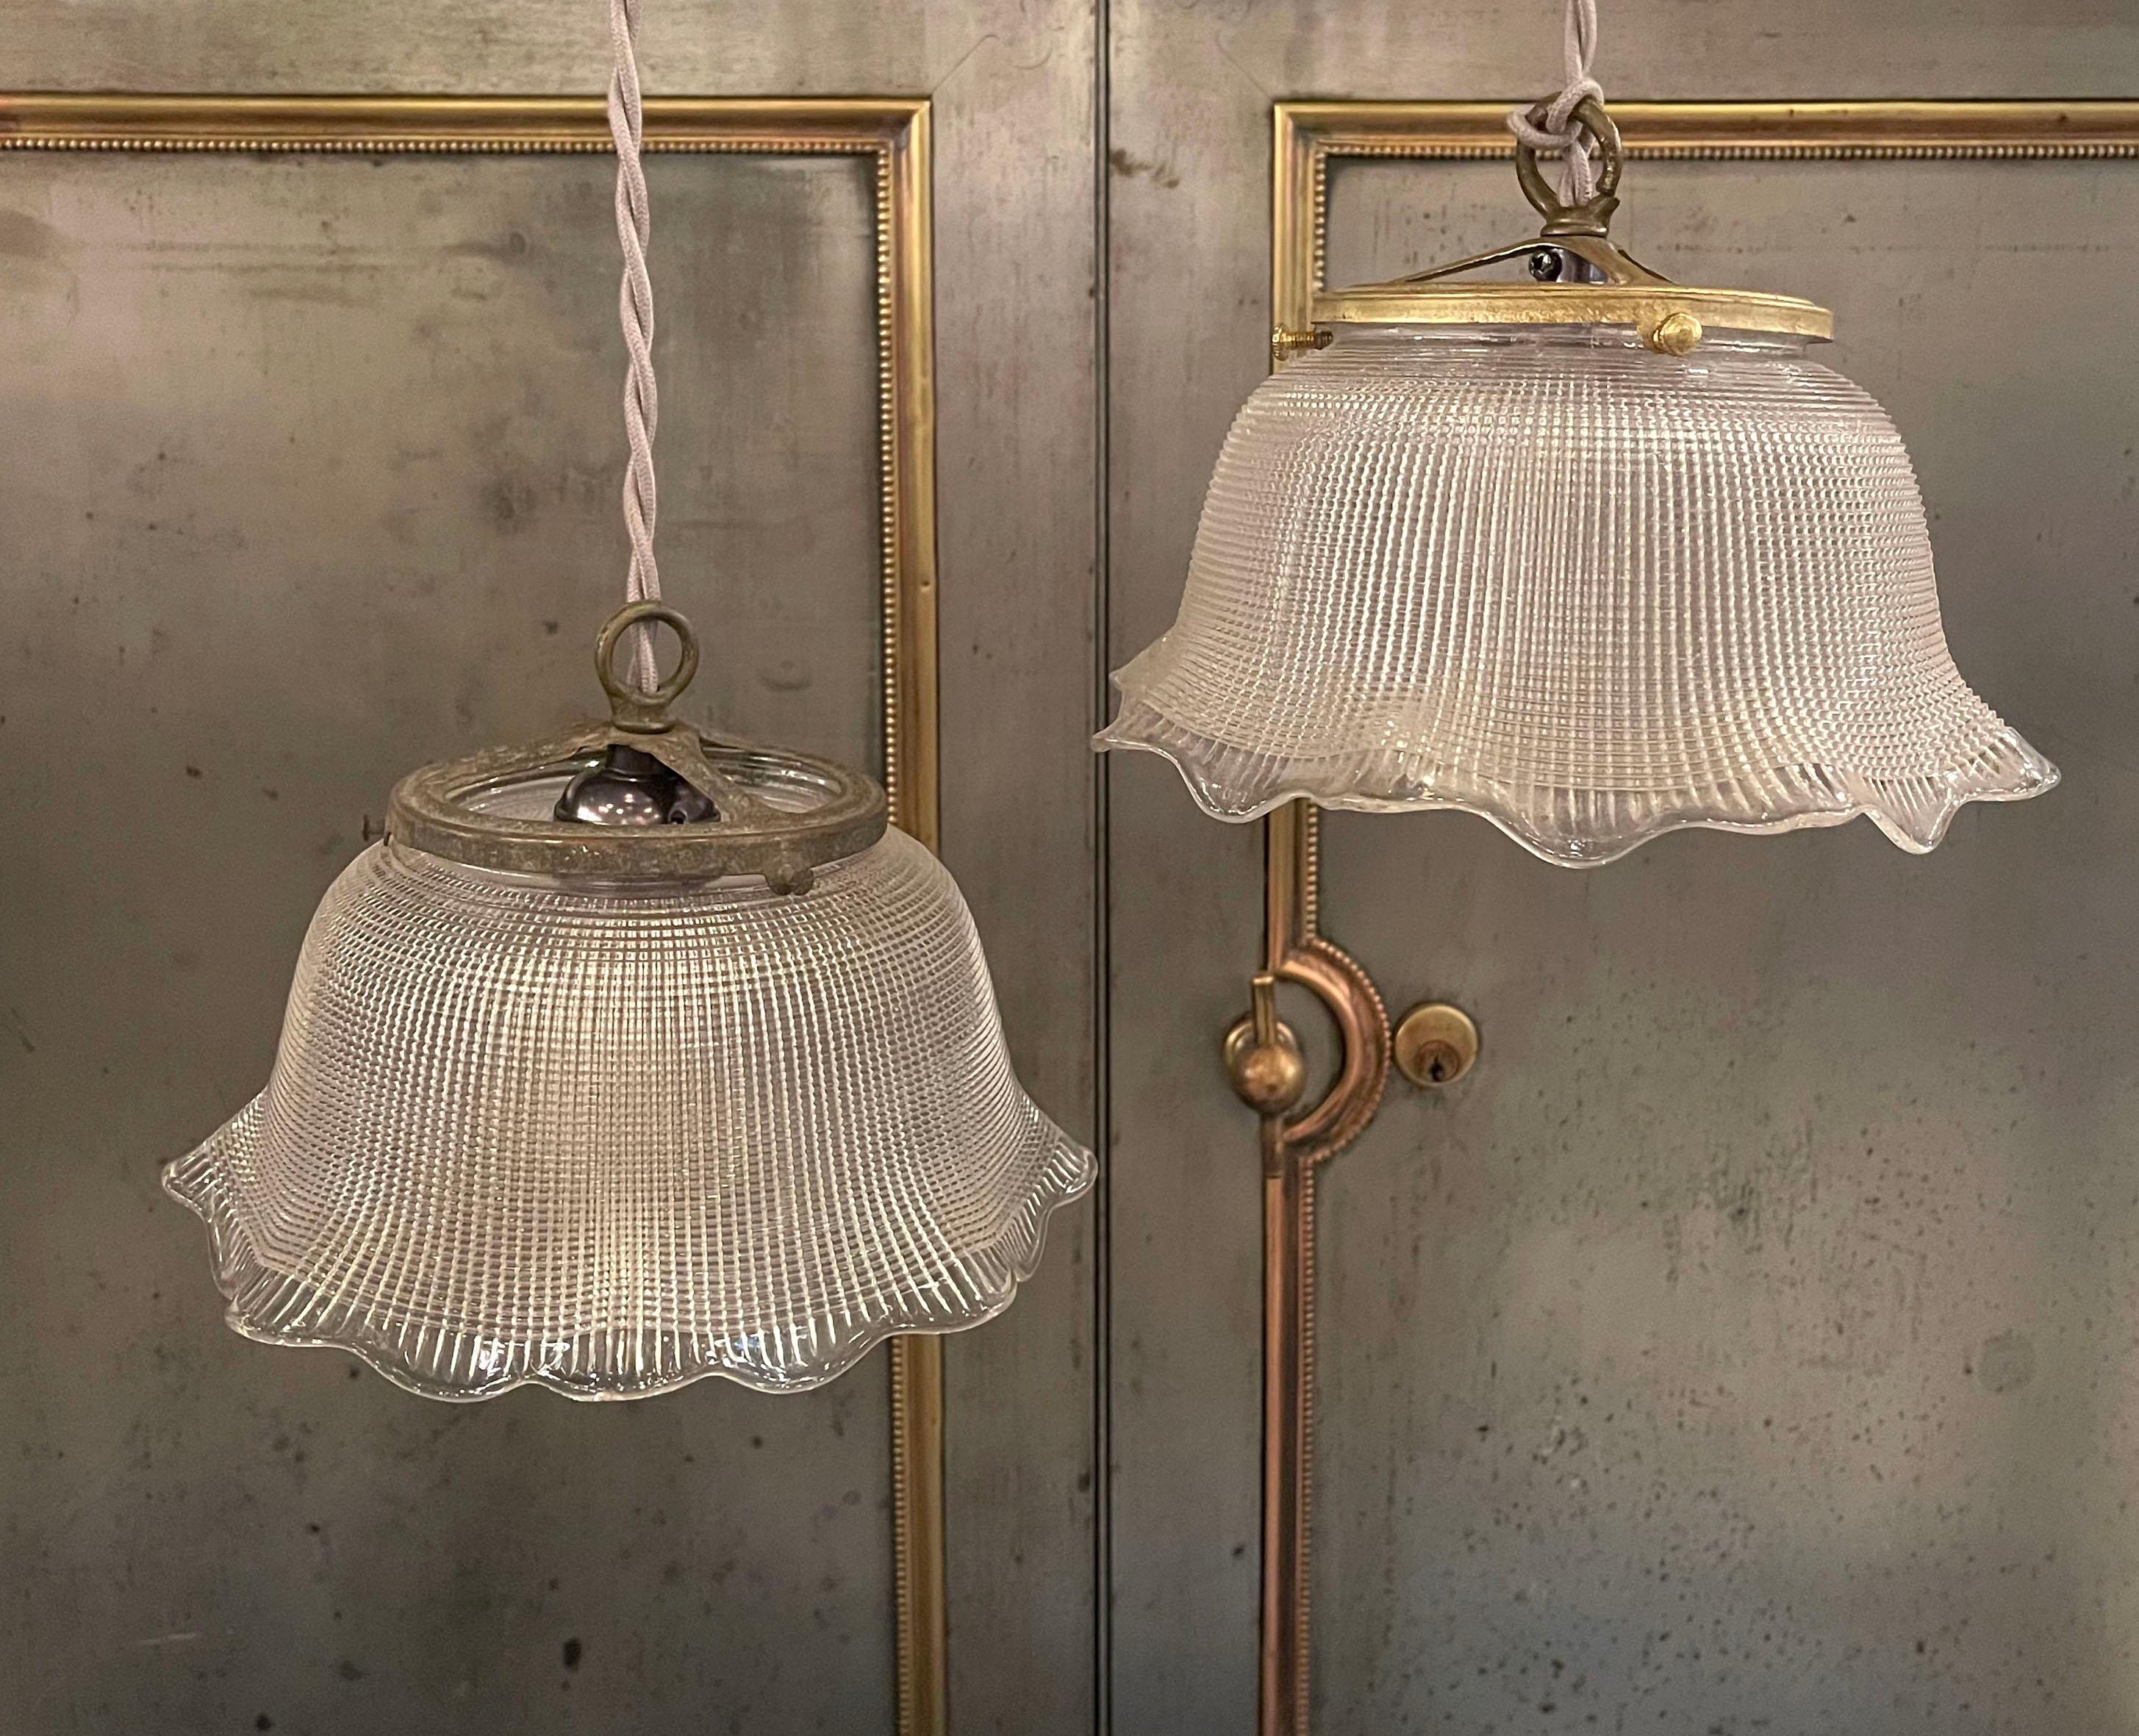 Industrial, ruffled bell-shaped, prismatic, Holophane glass pendant light with brass fitters and socket is newly wired with braided gray cloth cord. The pendant hangs at an overall height of 80.5 inches. One pendant is available.